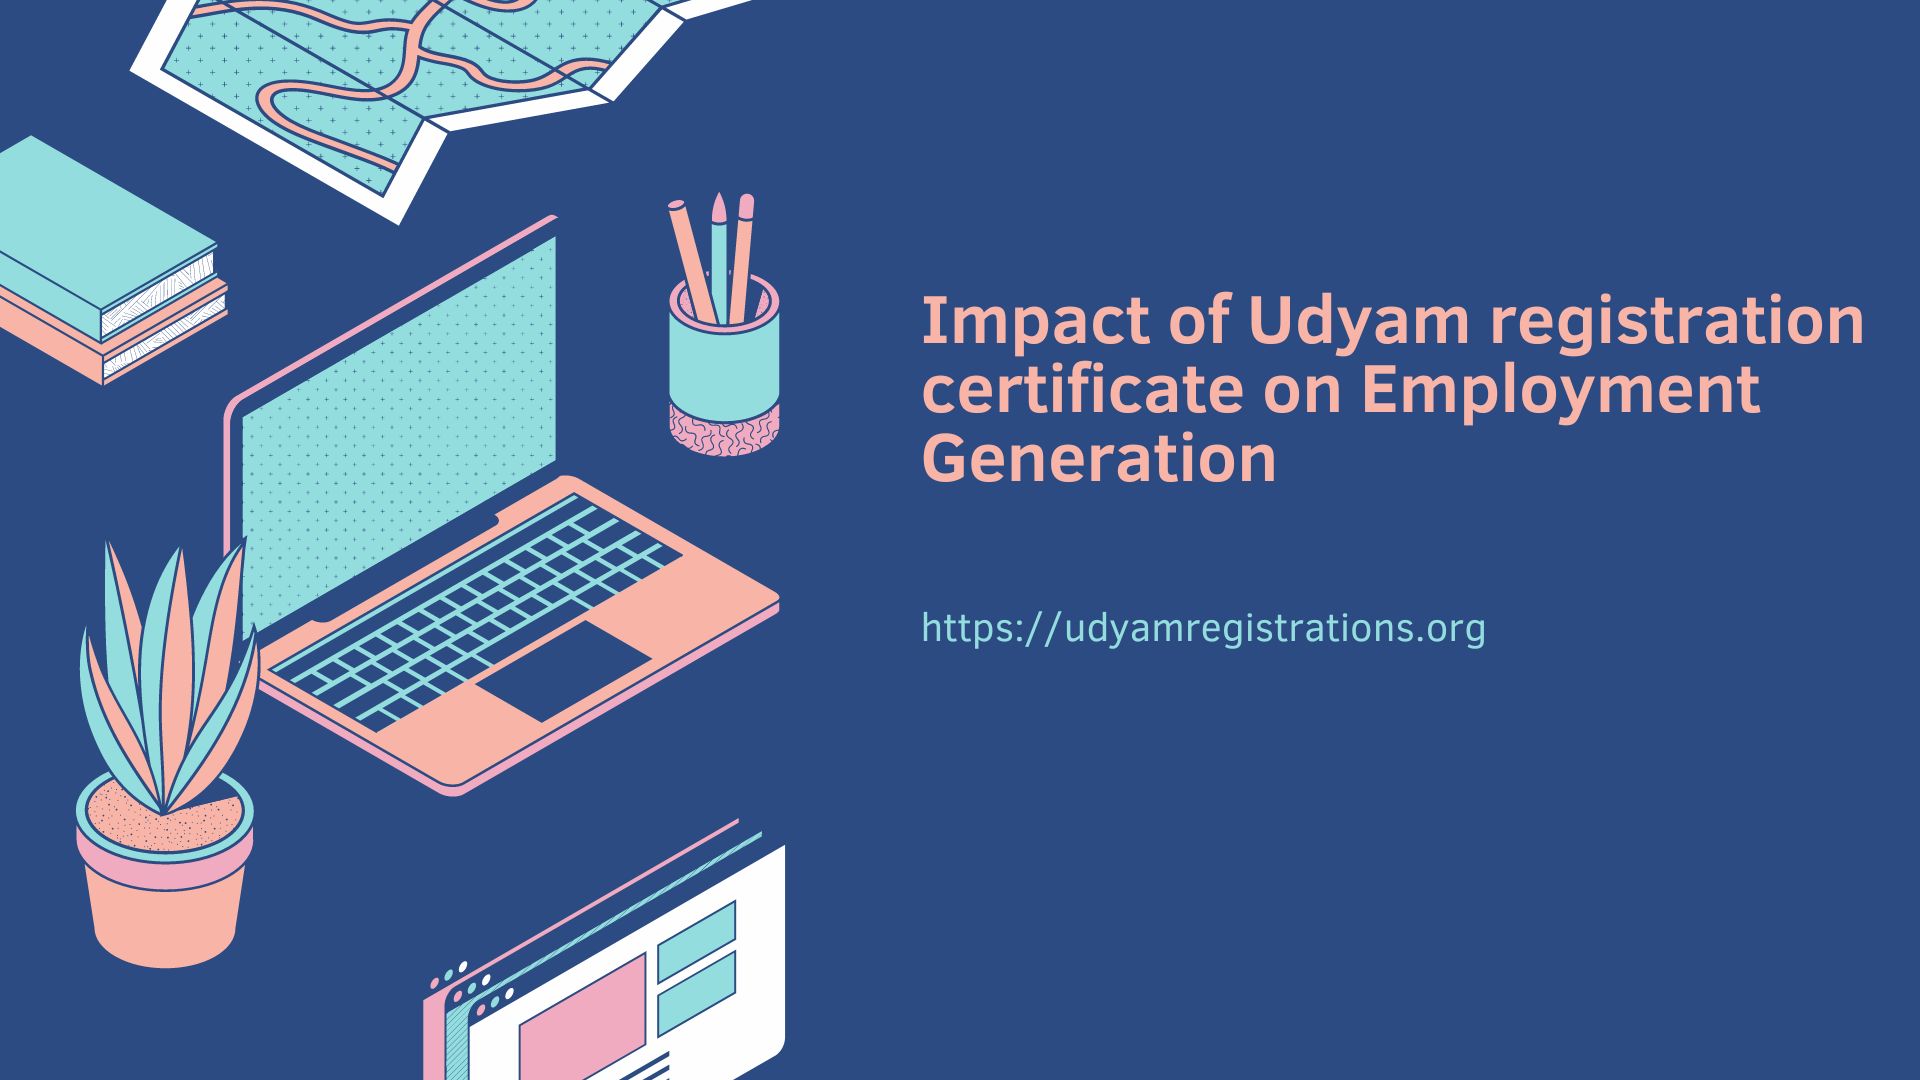 Impact of Udyam registration certificate on Employment Generation